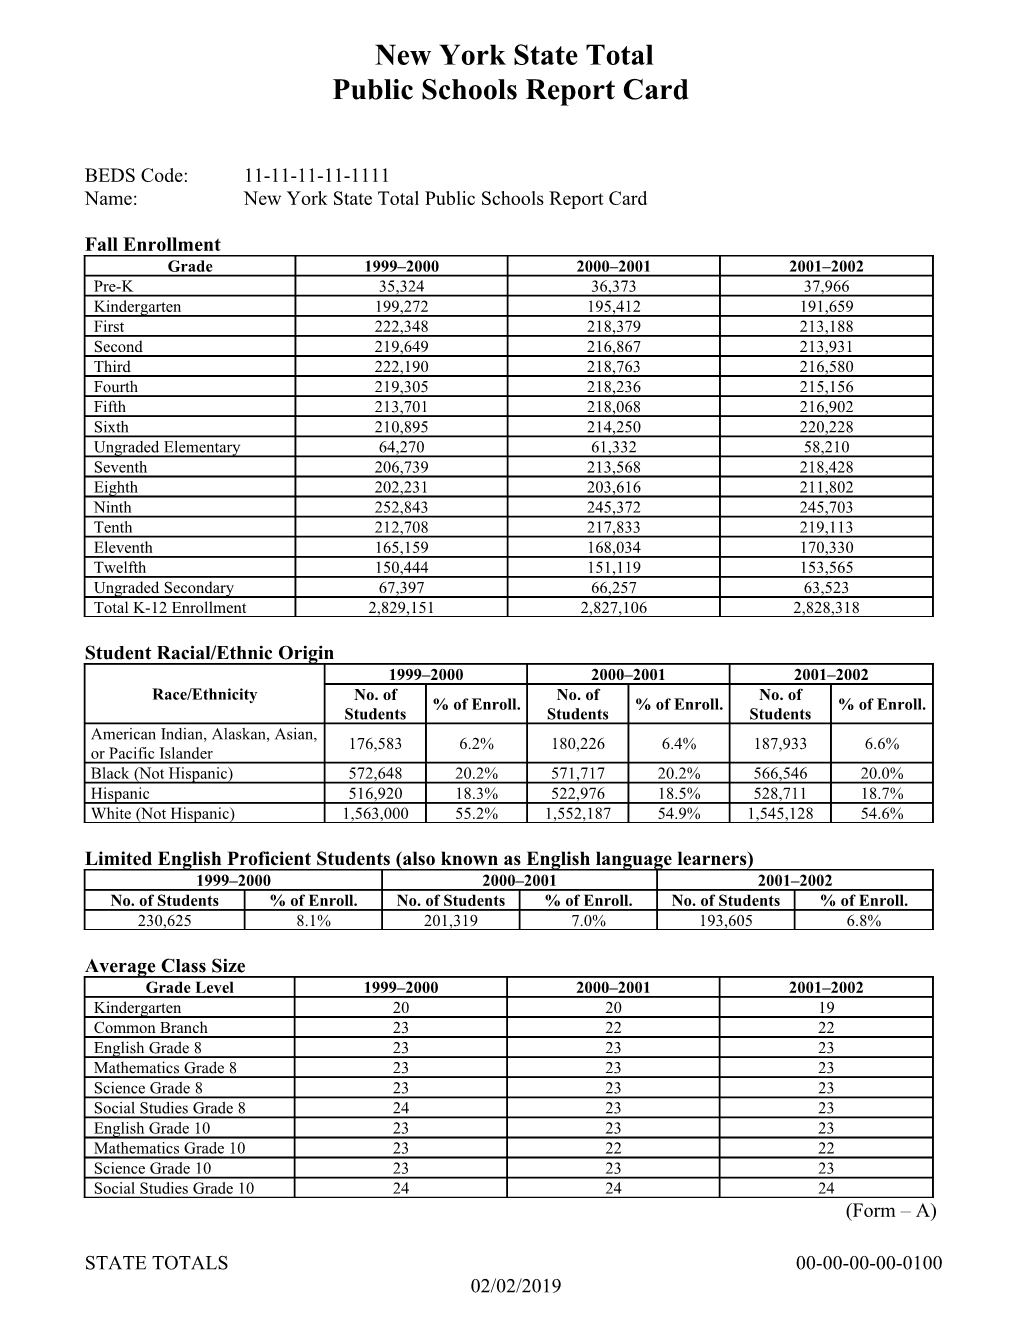 Statewide Public Comprehensive Information Report for 2001-02 School Year